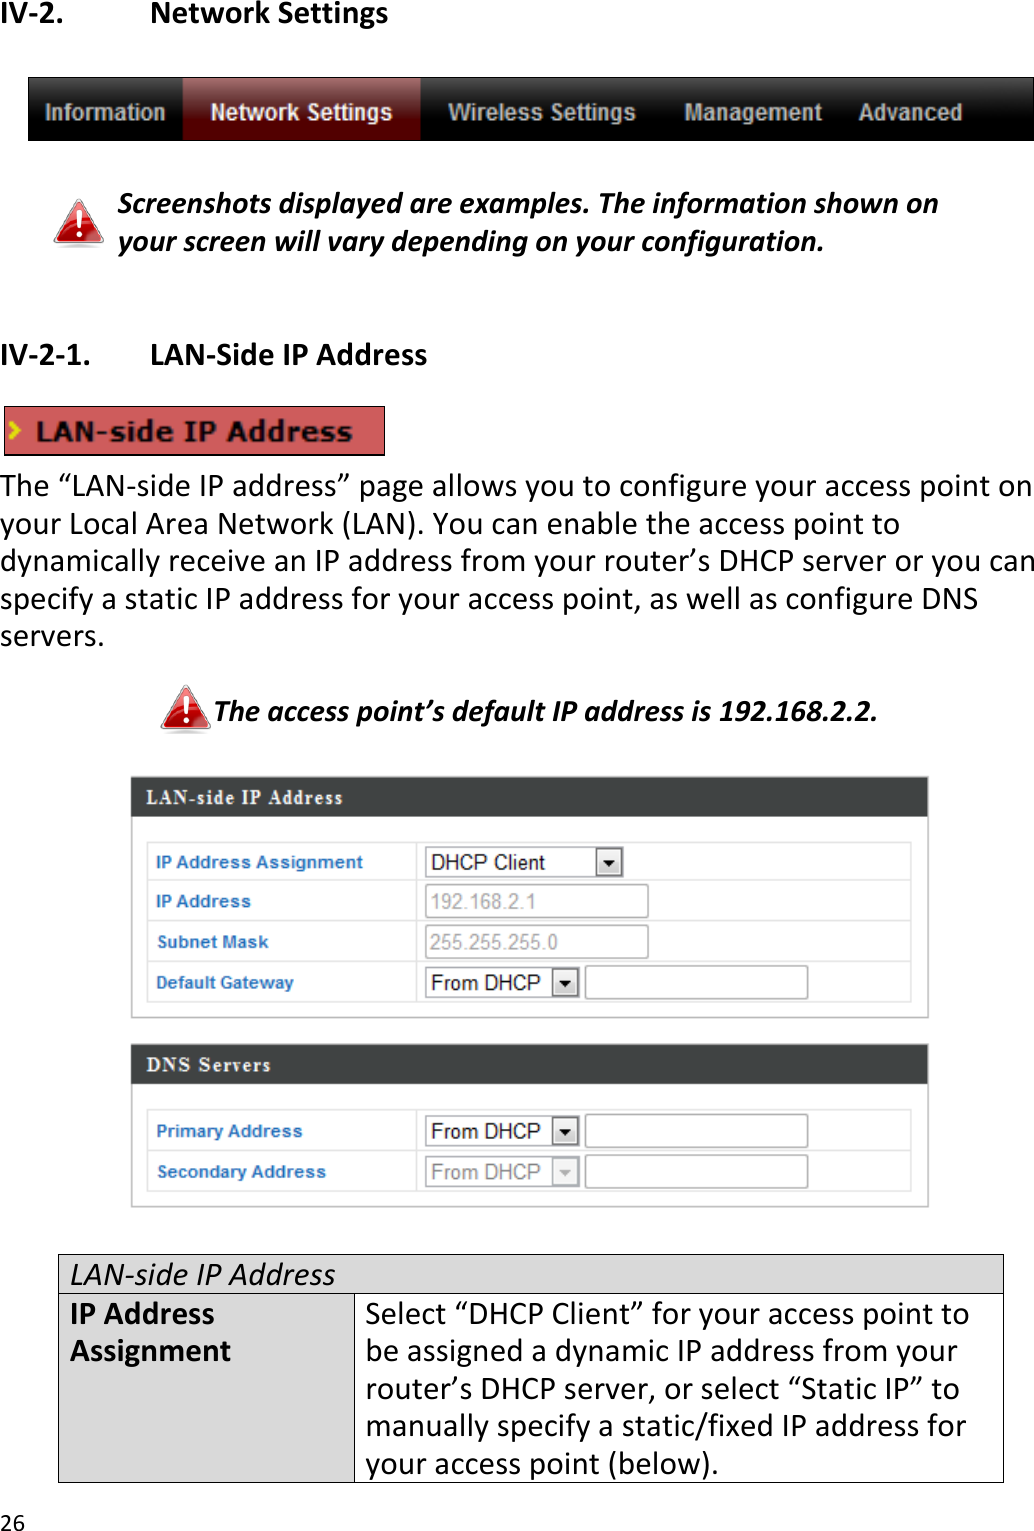 26  IV-2.    Network Settings    Screenshots displayed are examples. The information shown on your screen will vary depending on your configuration.  IV-2-1.   LAN-Side IP Address   The “LAN-side IP address” page allows you to configure your access point on your Local Area Network (LAN). You can enable the access point to dynamically receive an IP address from your router’s DHCP server or you can specify a static IP address for your access point, as well as configure DNS servers.  The access point’s default IP address is 192.168.2.2.    LAN-side IP Address IP Address Assignment Select “DHCP Client” for your access point to be assigned a dynamic IP address from your router’s DHCP server, or select “Static IP” to manually specify a static/fixed IP address for your access point (below). 